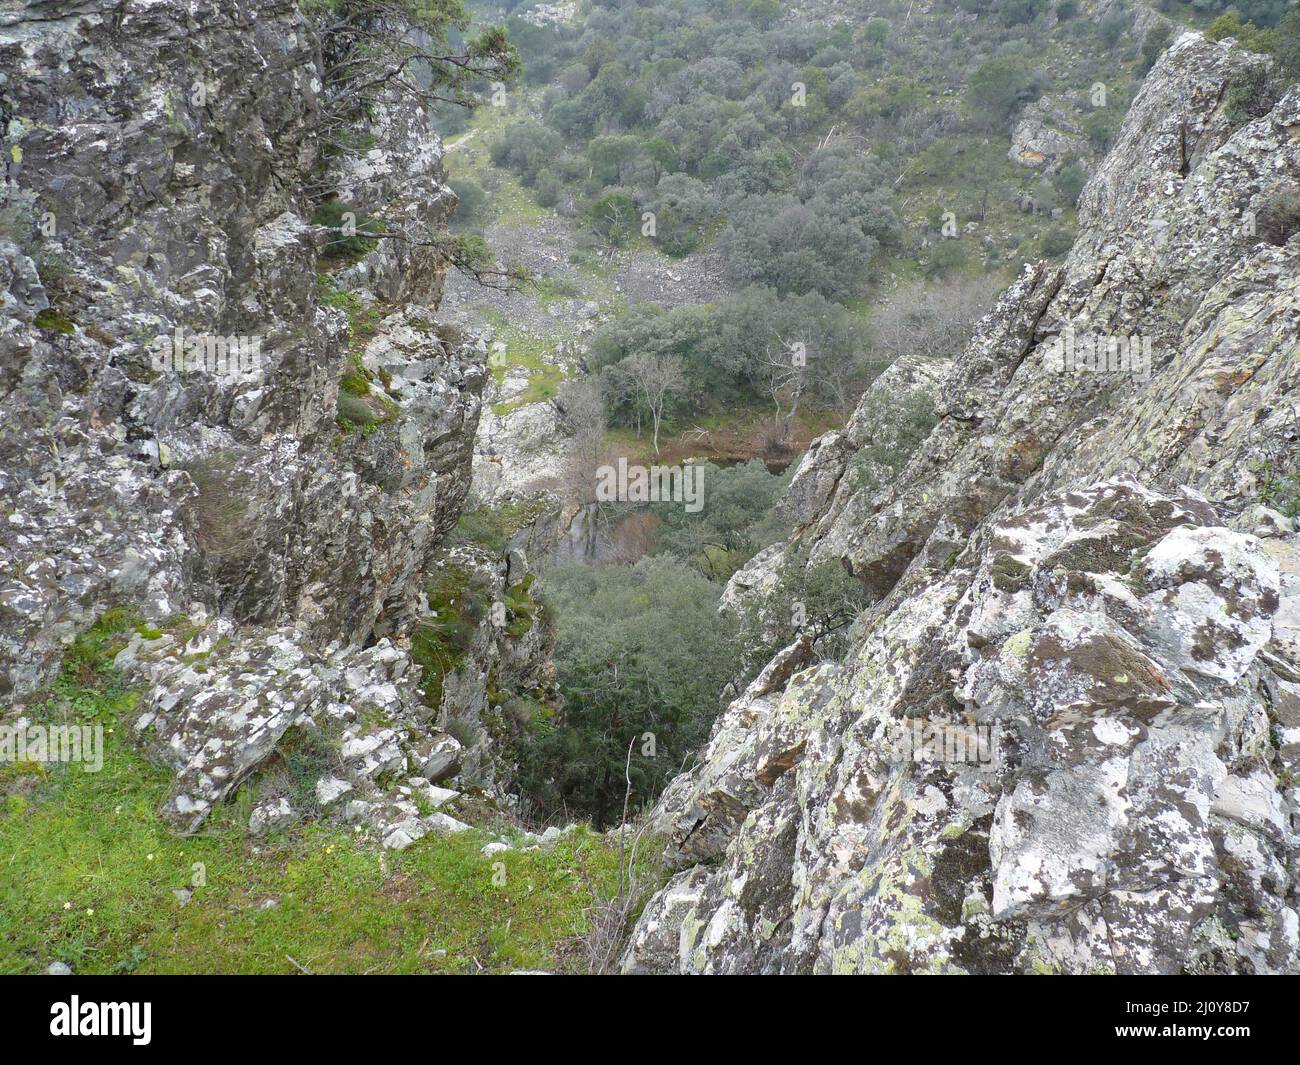 Plants, trees, waterfalls, rocks, bridges and mountains in Andalusia, Spain Stock Photo